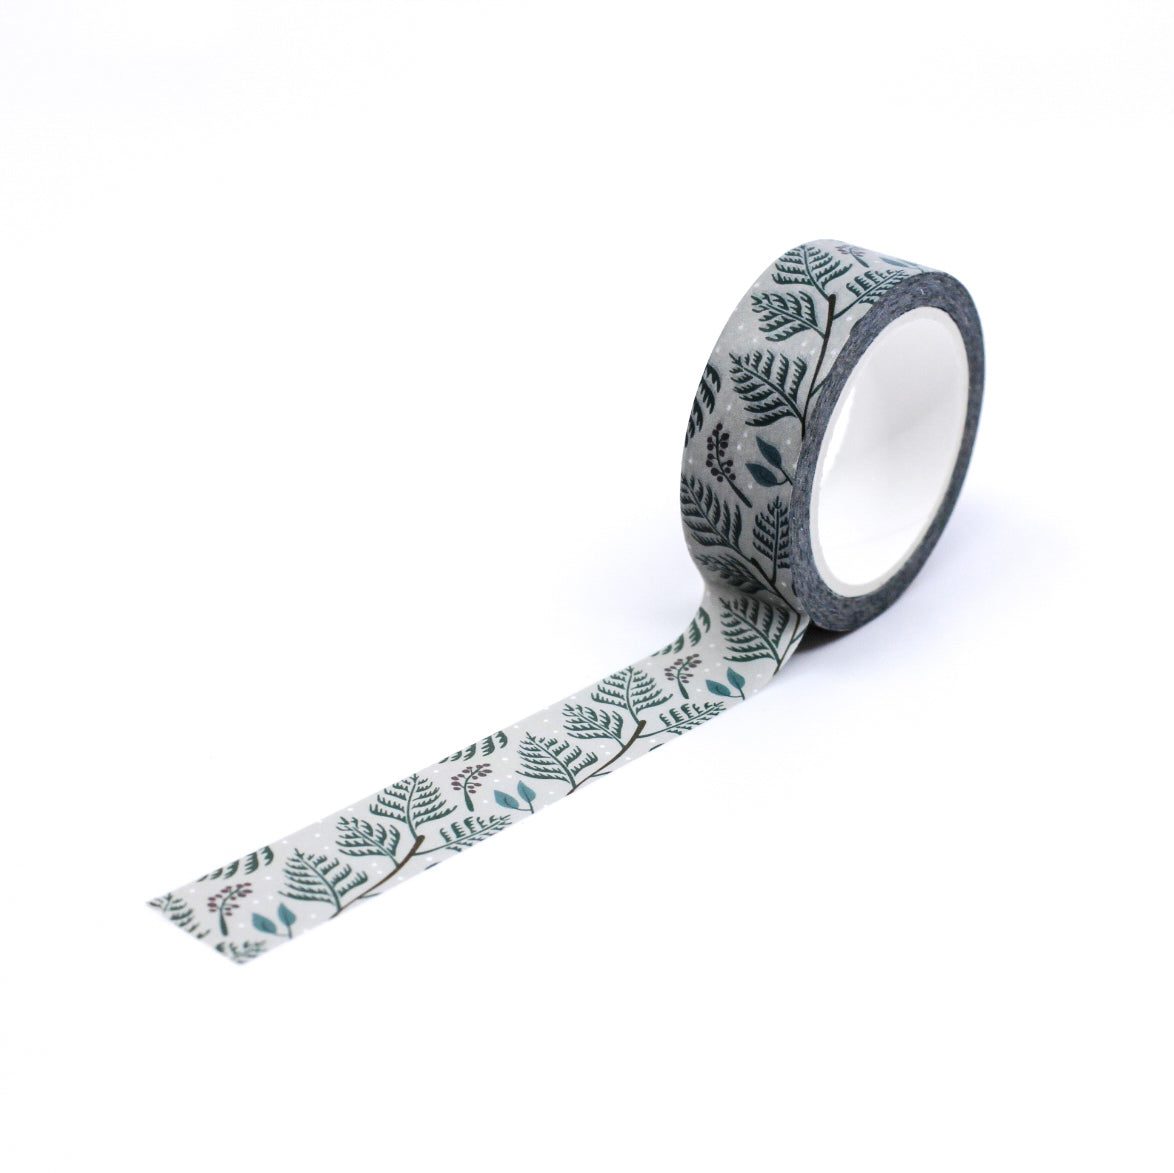 Festive Winter Tree Branches Washi Tape, a delightful blend of whimsical holiday charm and snowy branches, perfect for adding a touch of winter magic to your festive crafts and decorations. This tape is from Maylay Co and sold at BBB Supplies Craft Shop.